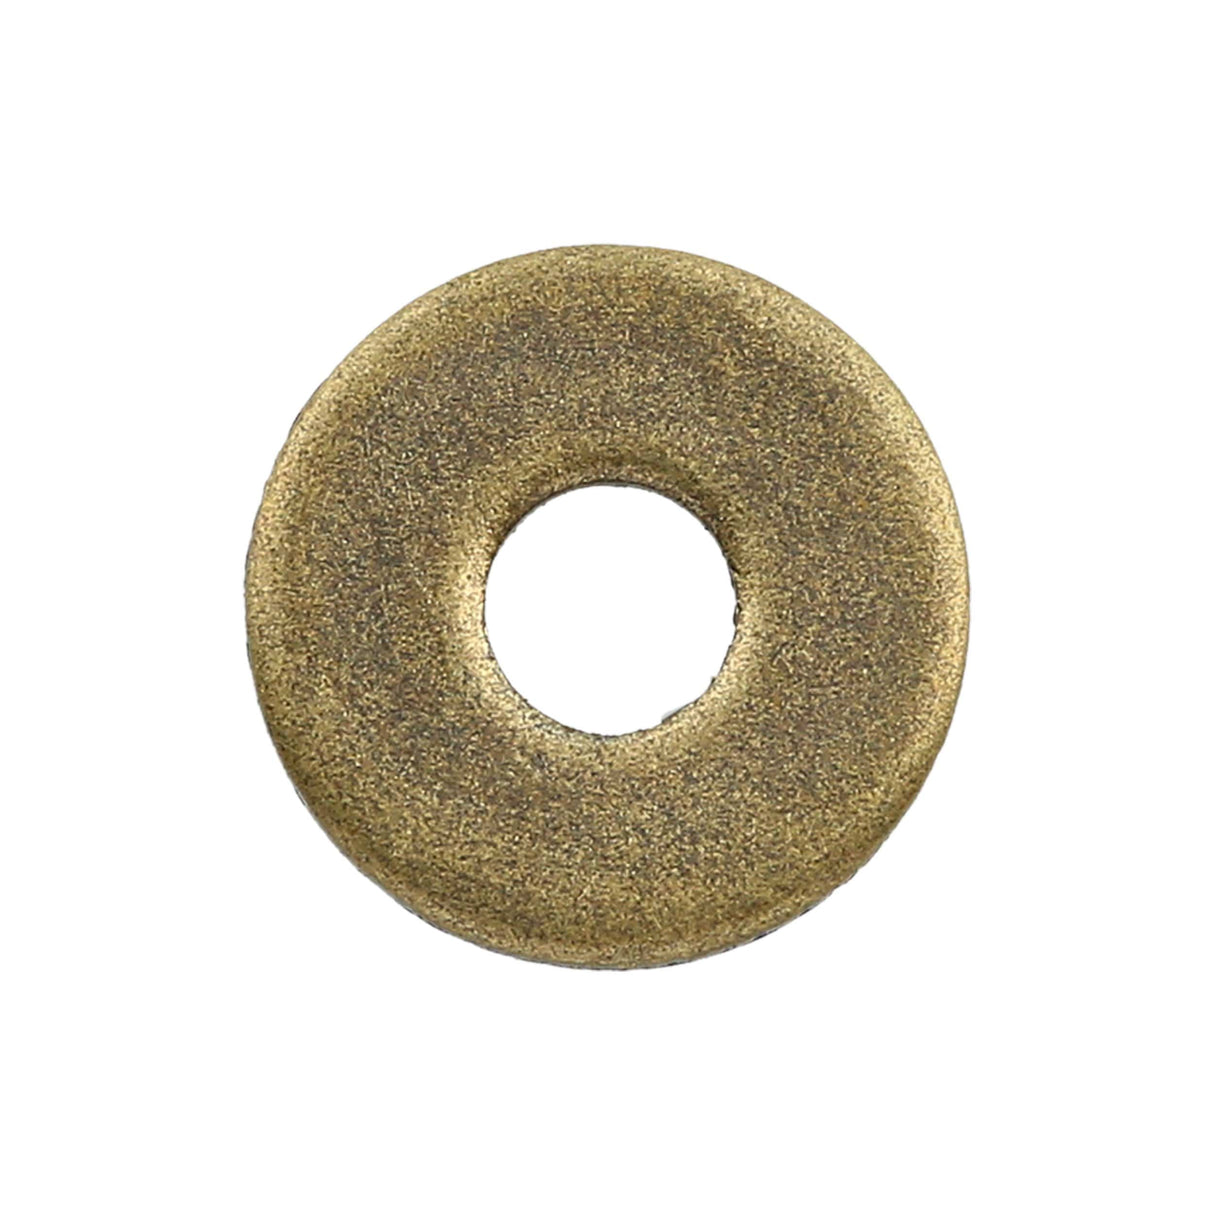 Ohio Travel Bag Fasteners 3/8" Antique Brass, Washer, Steel, #L-1126-ANTB L-1126-ANTB